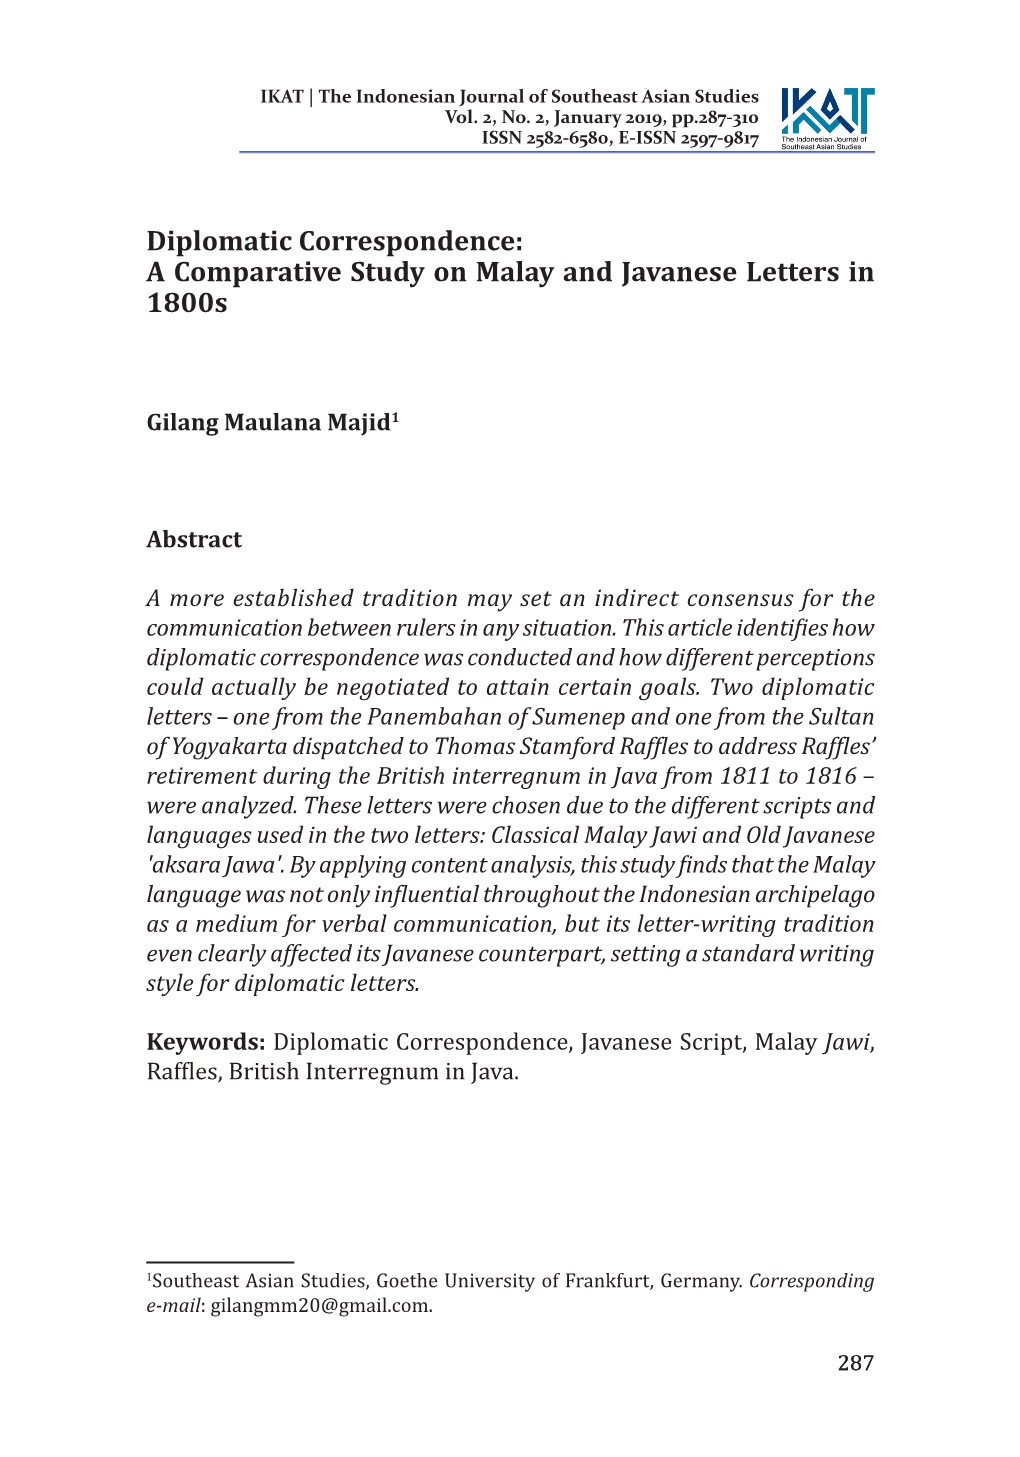 Diplomatic Correspondence: a Comparative Study on Malay and Javanese Letters in 1800S